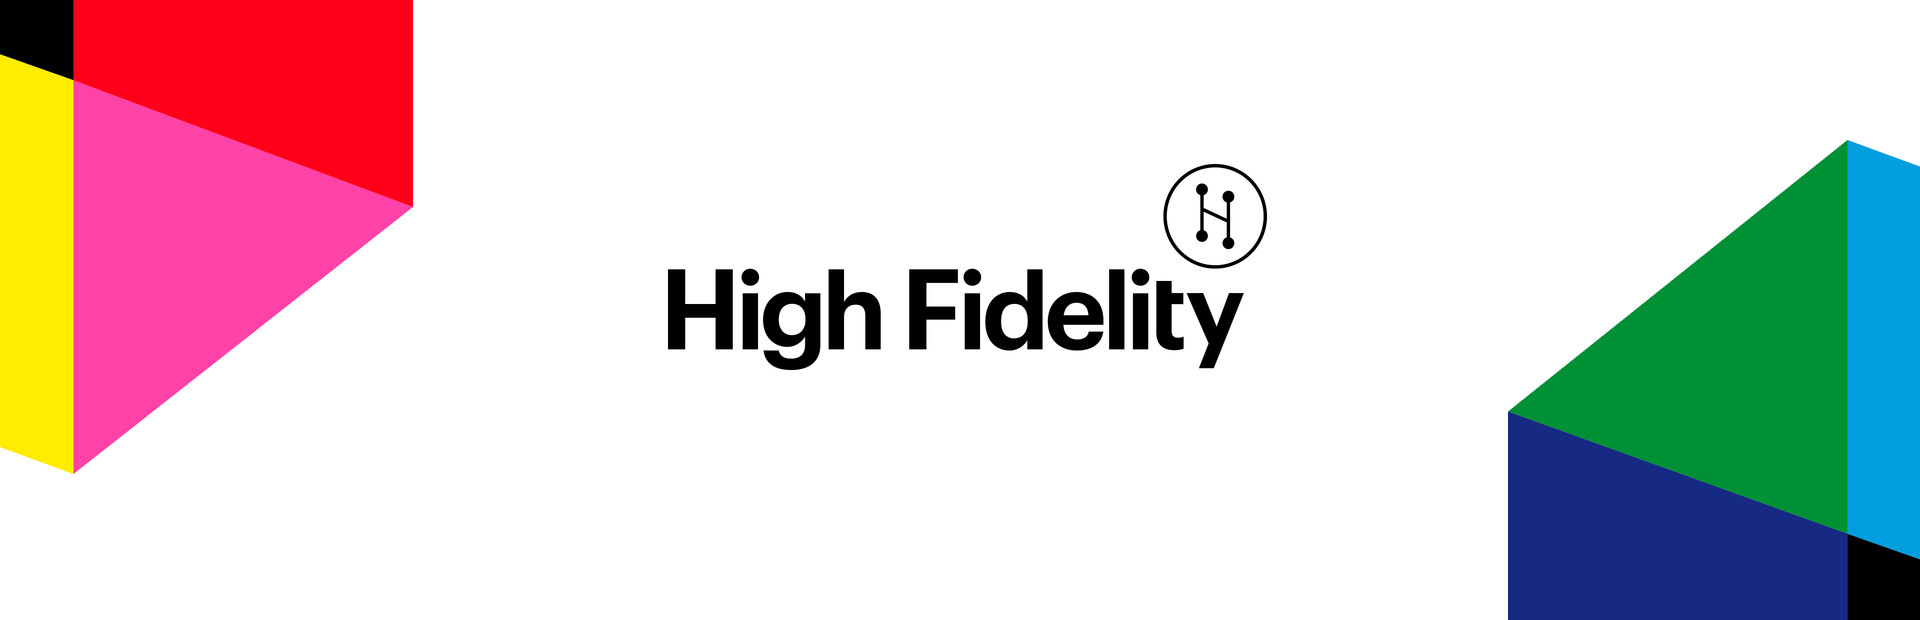 High Fidelity cover image